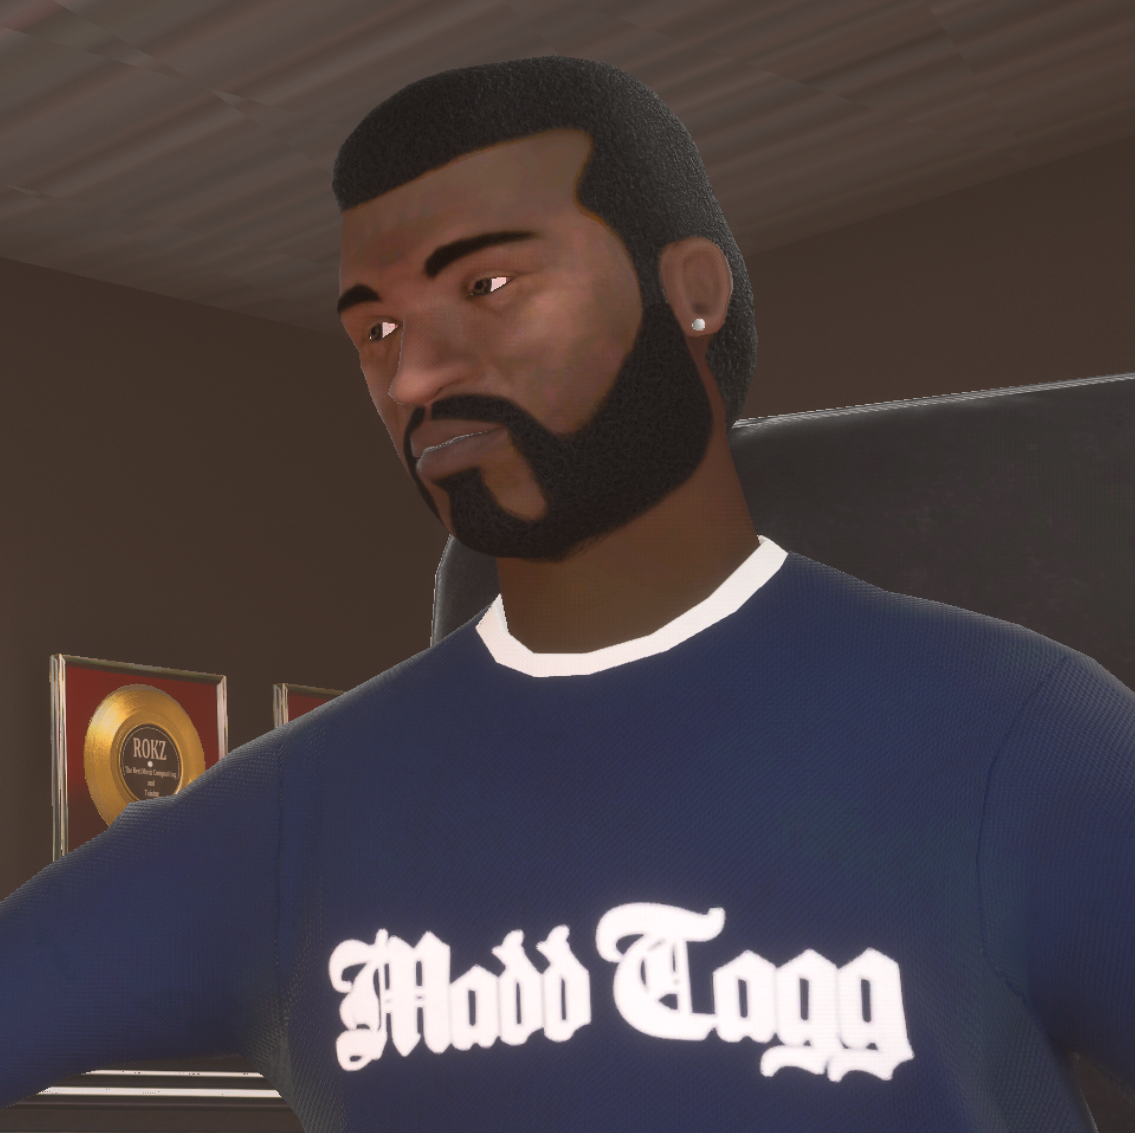 gta san andreas characters based on rappers